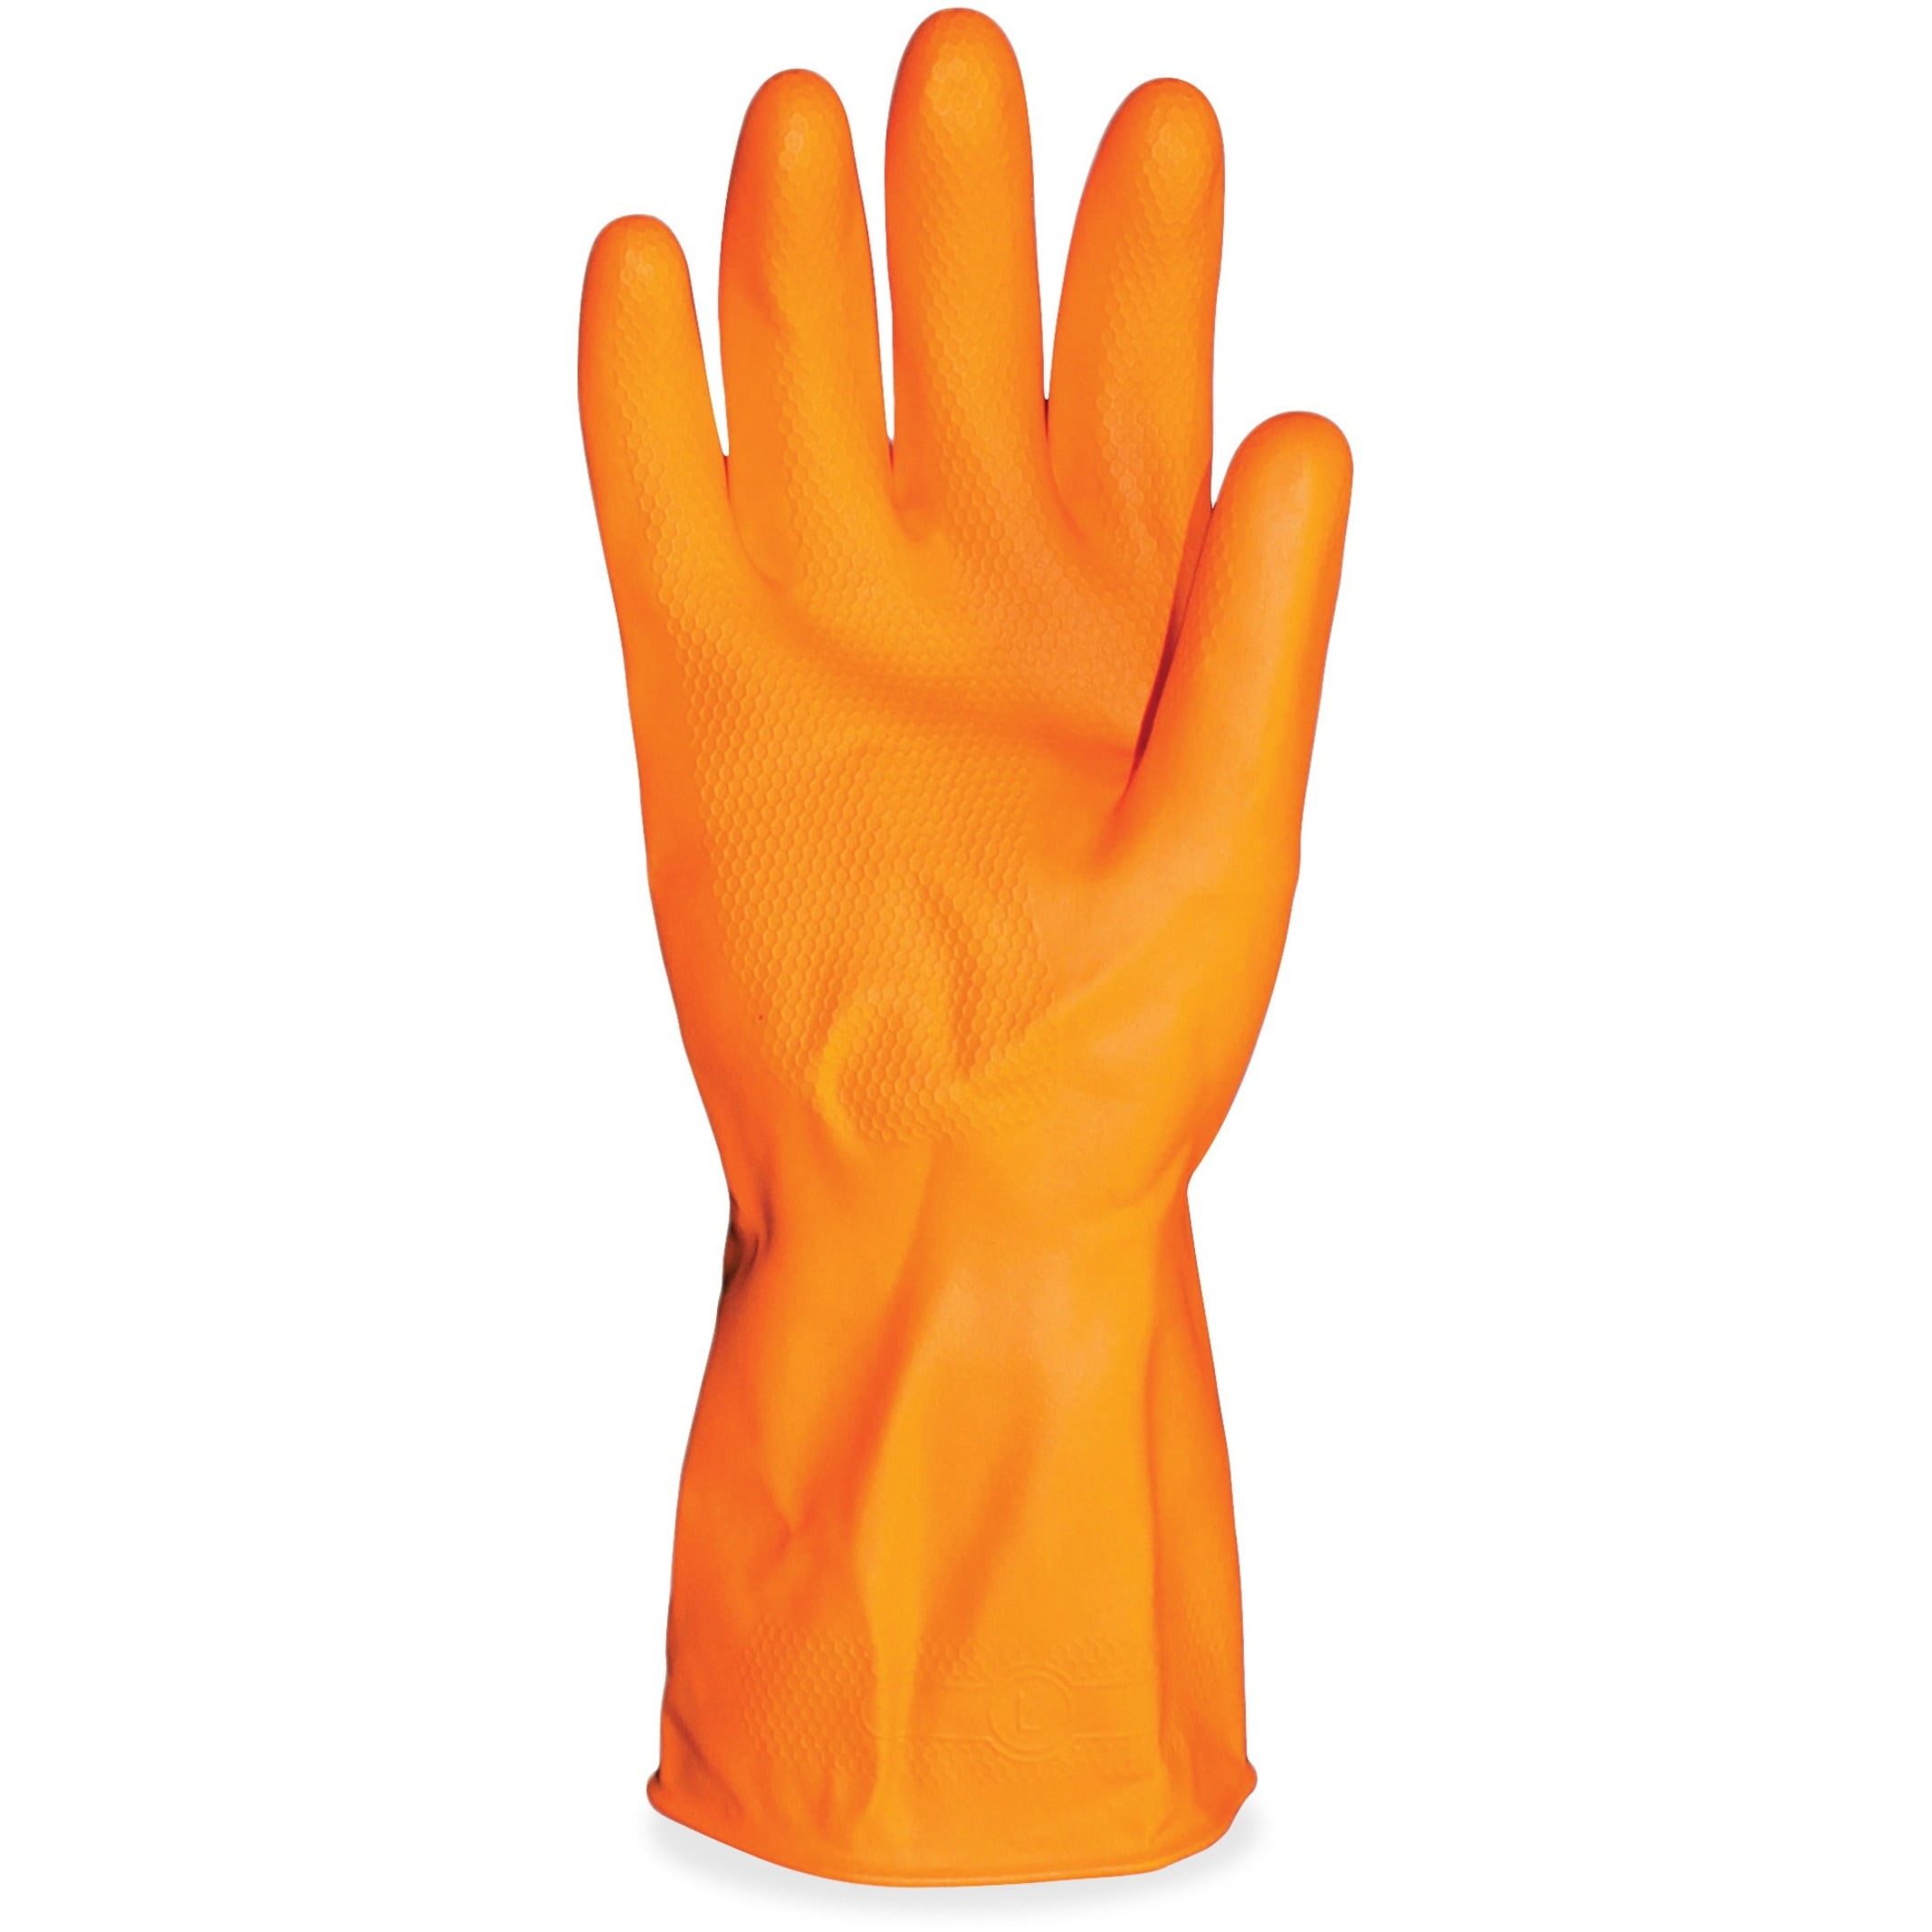 X-large Size Embossed Grip Proguard Deluxe Flock Lined Latex Gloves Extra